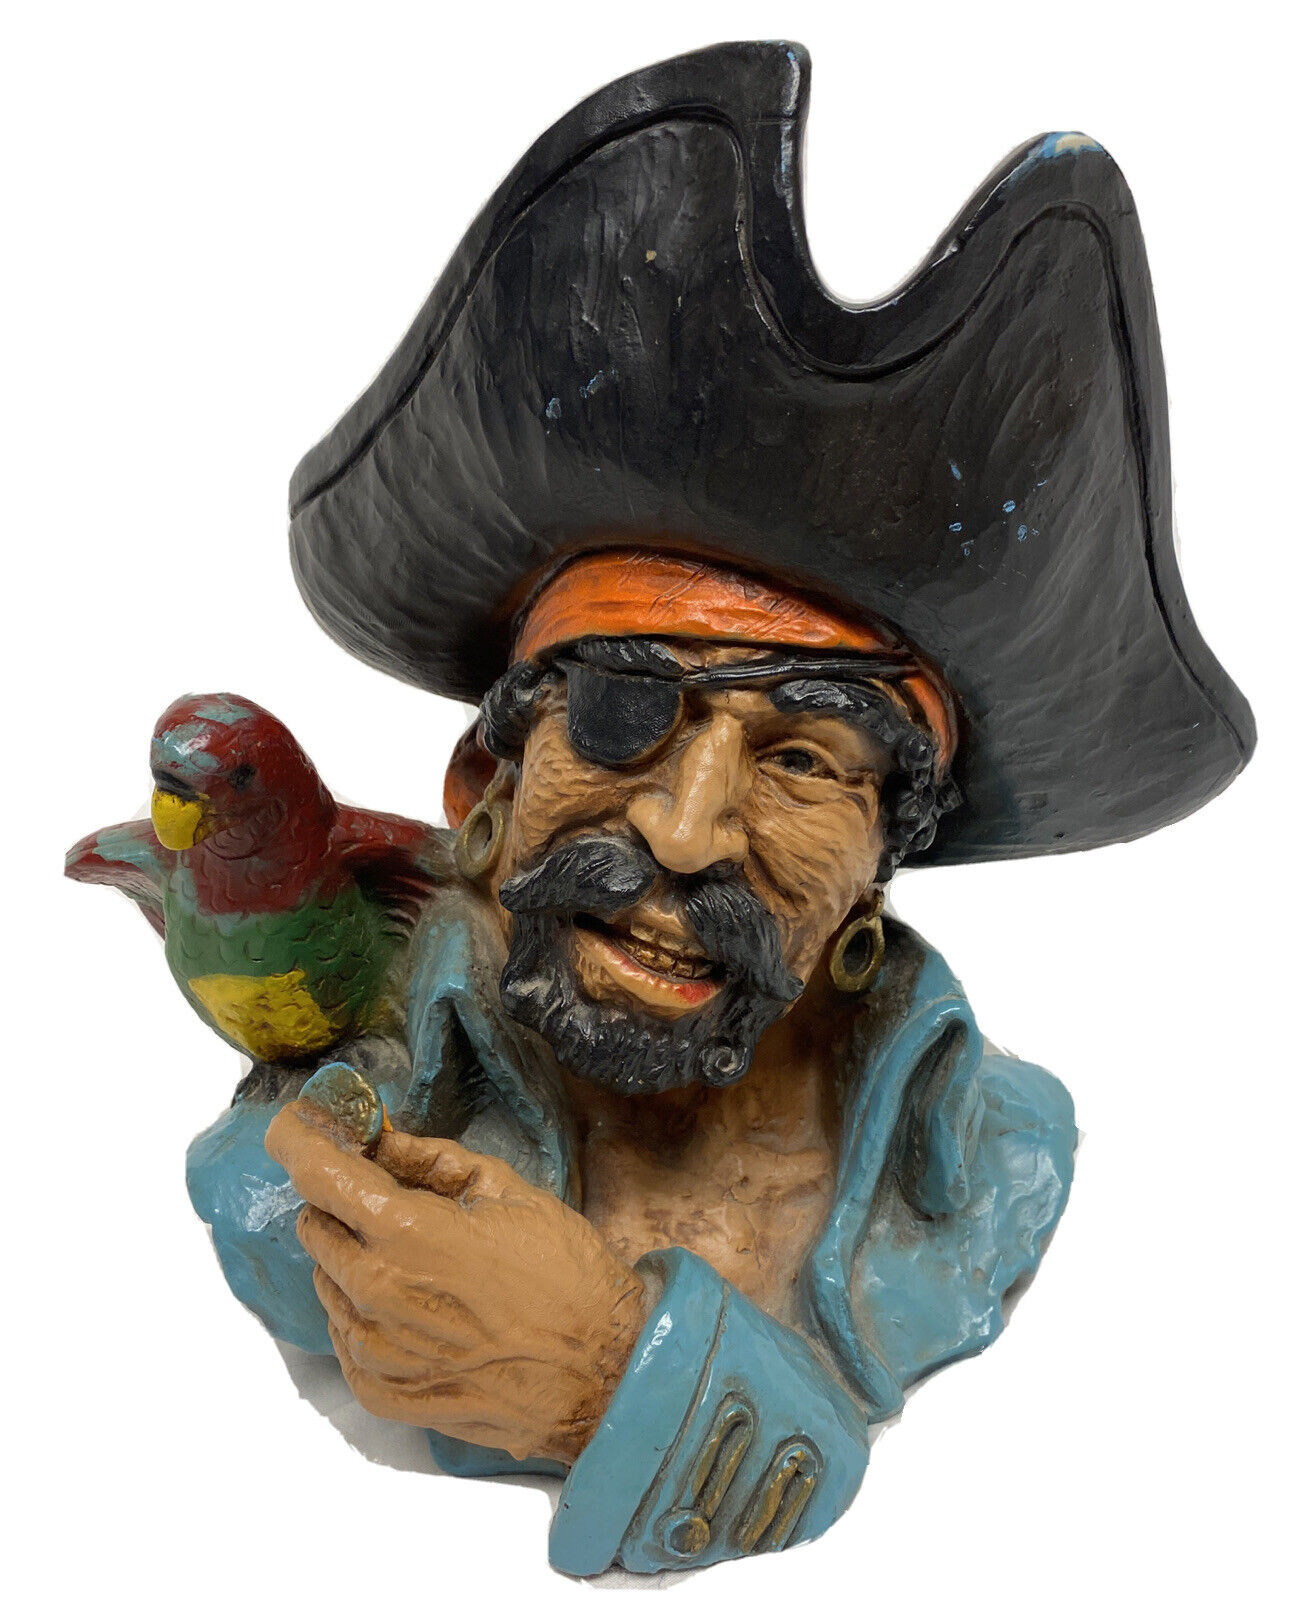 RARE 70s Universal Statuary Corp. Chicago 1974 Pirate Captain Bust By V Kendrick